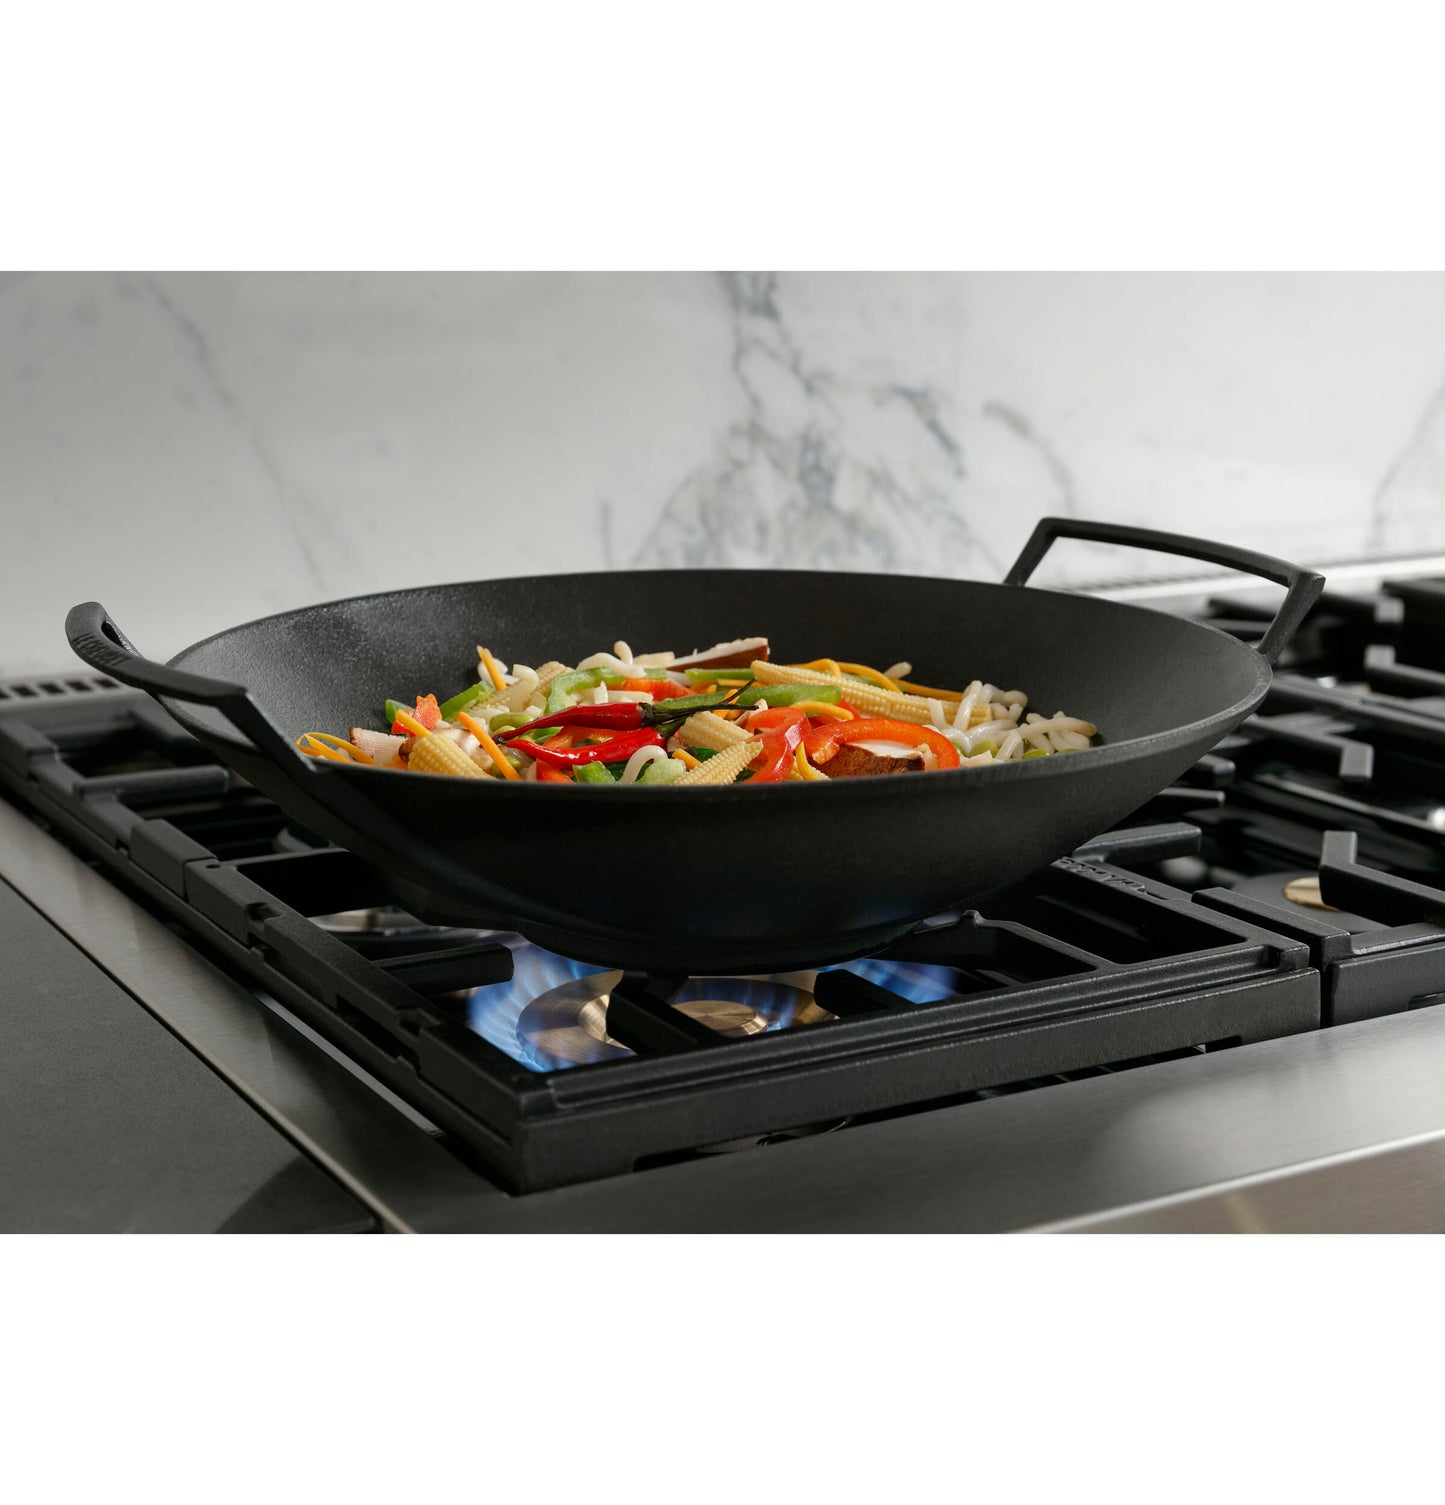 Monogram ZGP486NDTSS Monogram 48" All Gas Professional Range With 6 Burners And Griddle (Natural Gas)